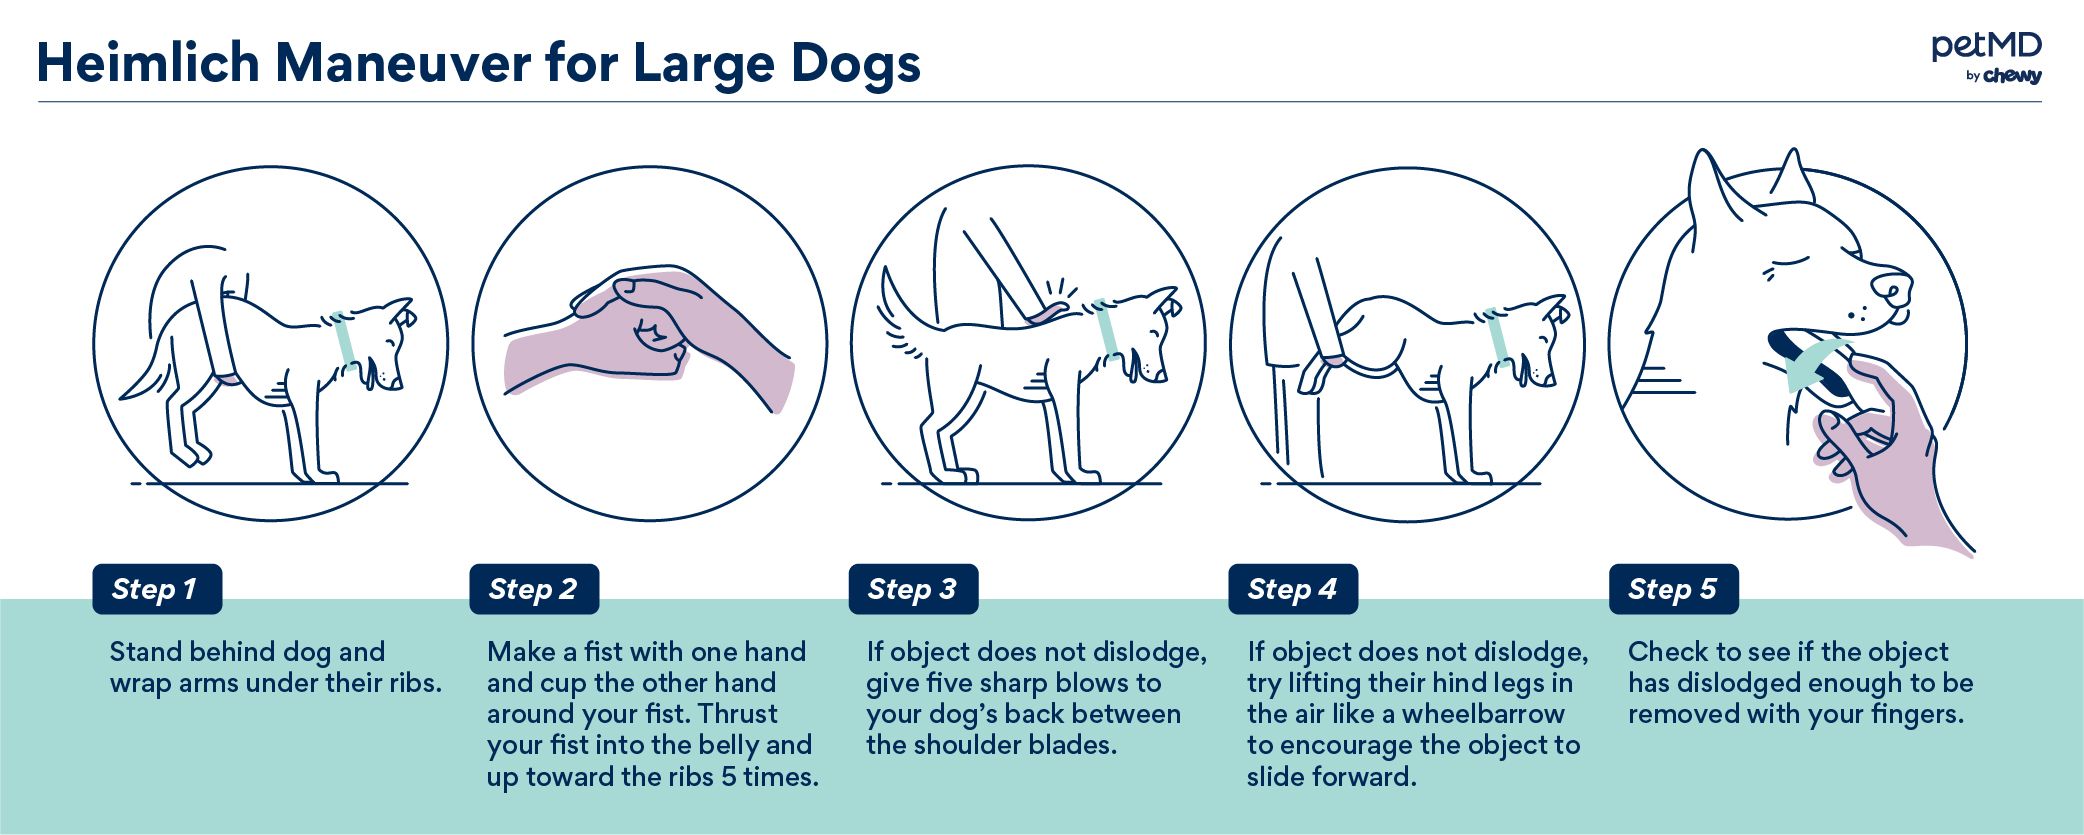 how to perform the heimlich maneuver for large dogs